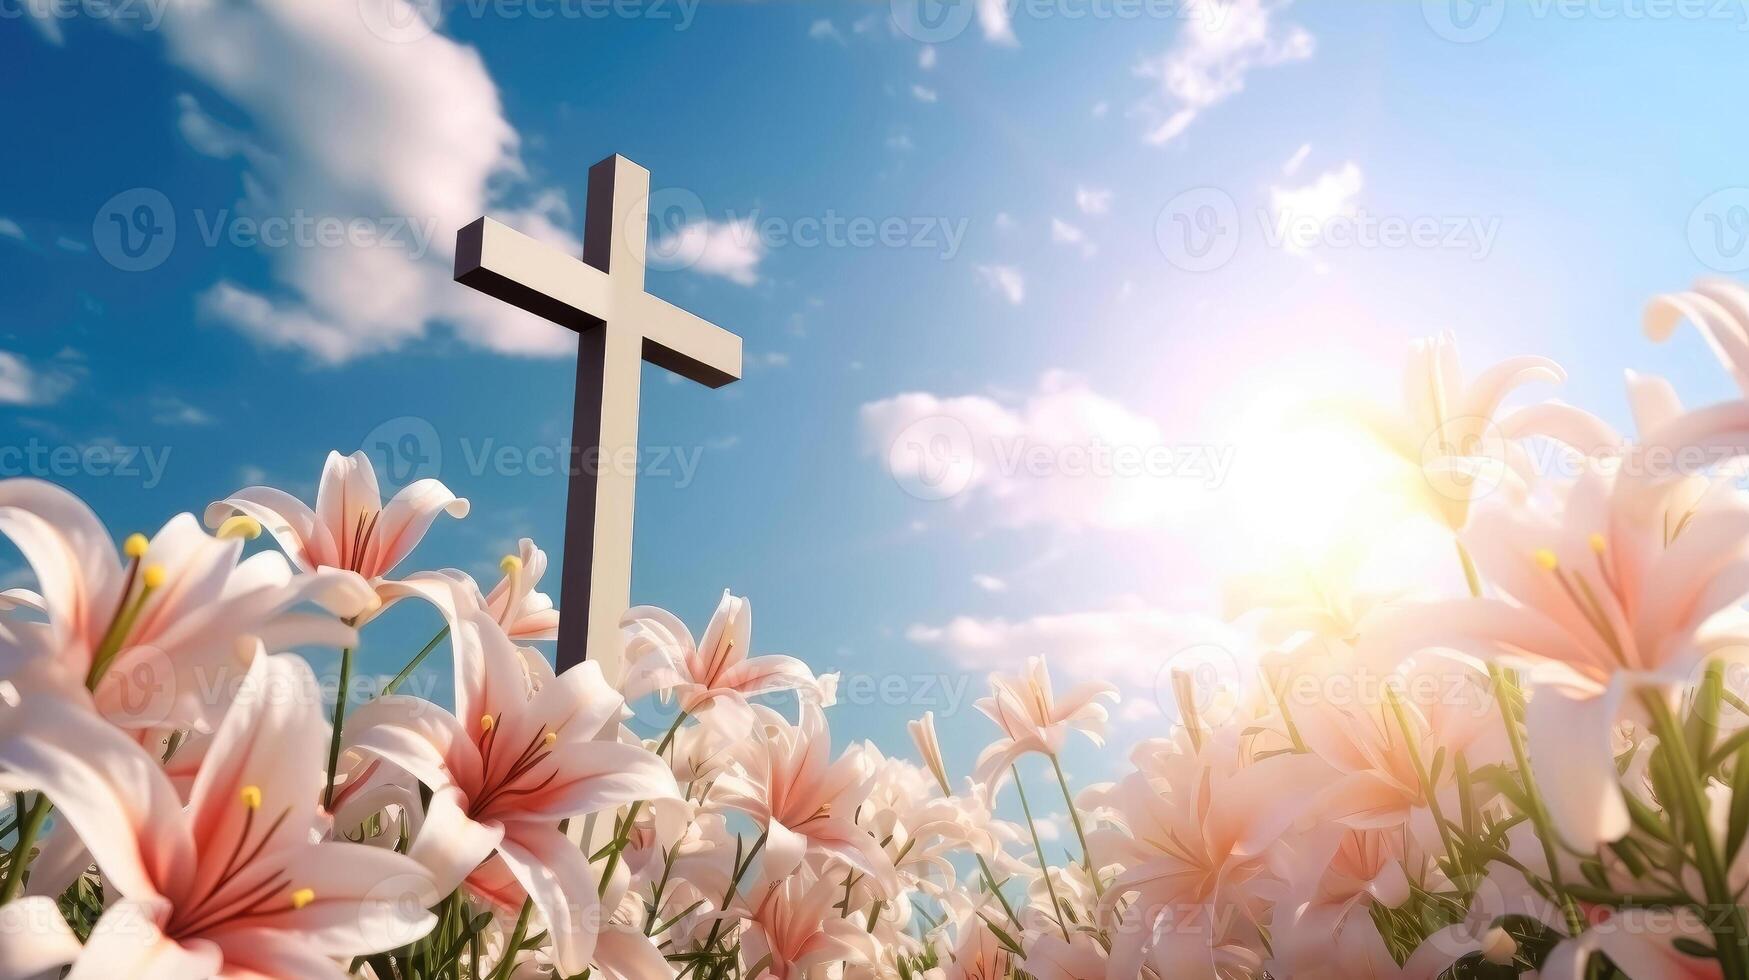 Divine Serenity - Wooden Cross Among White Lilies and Blue Sky photo